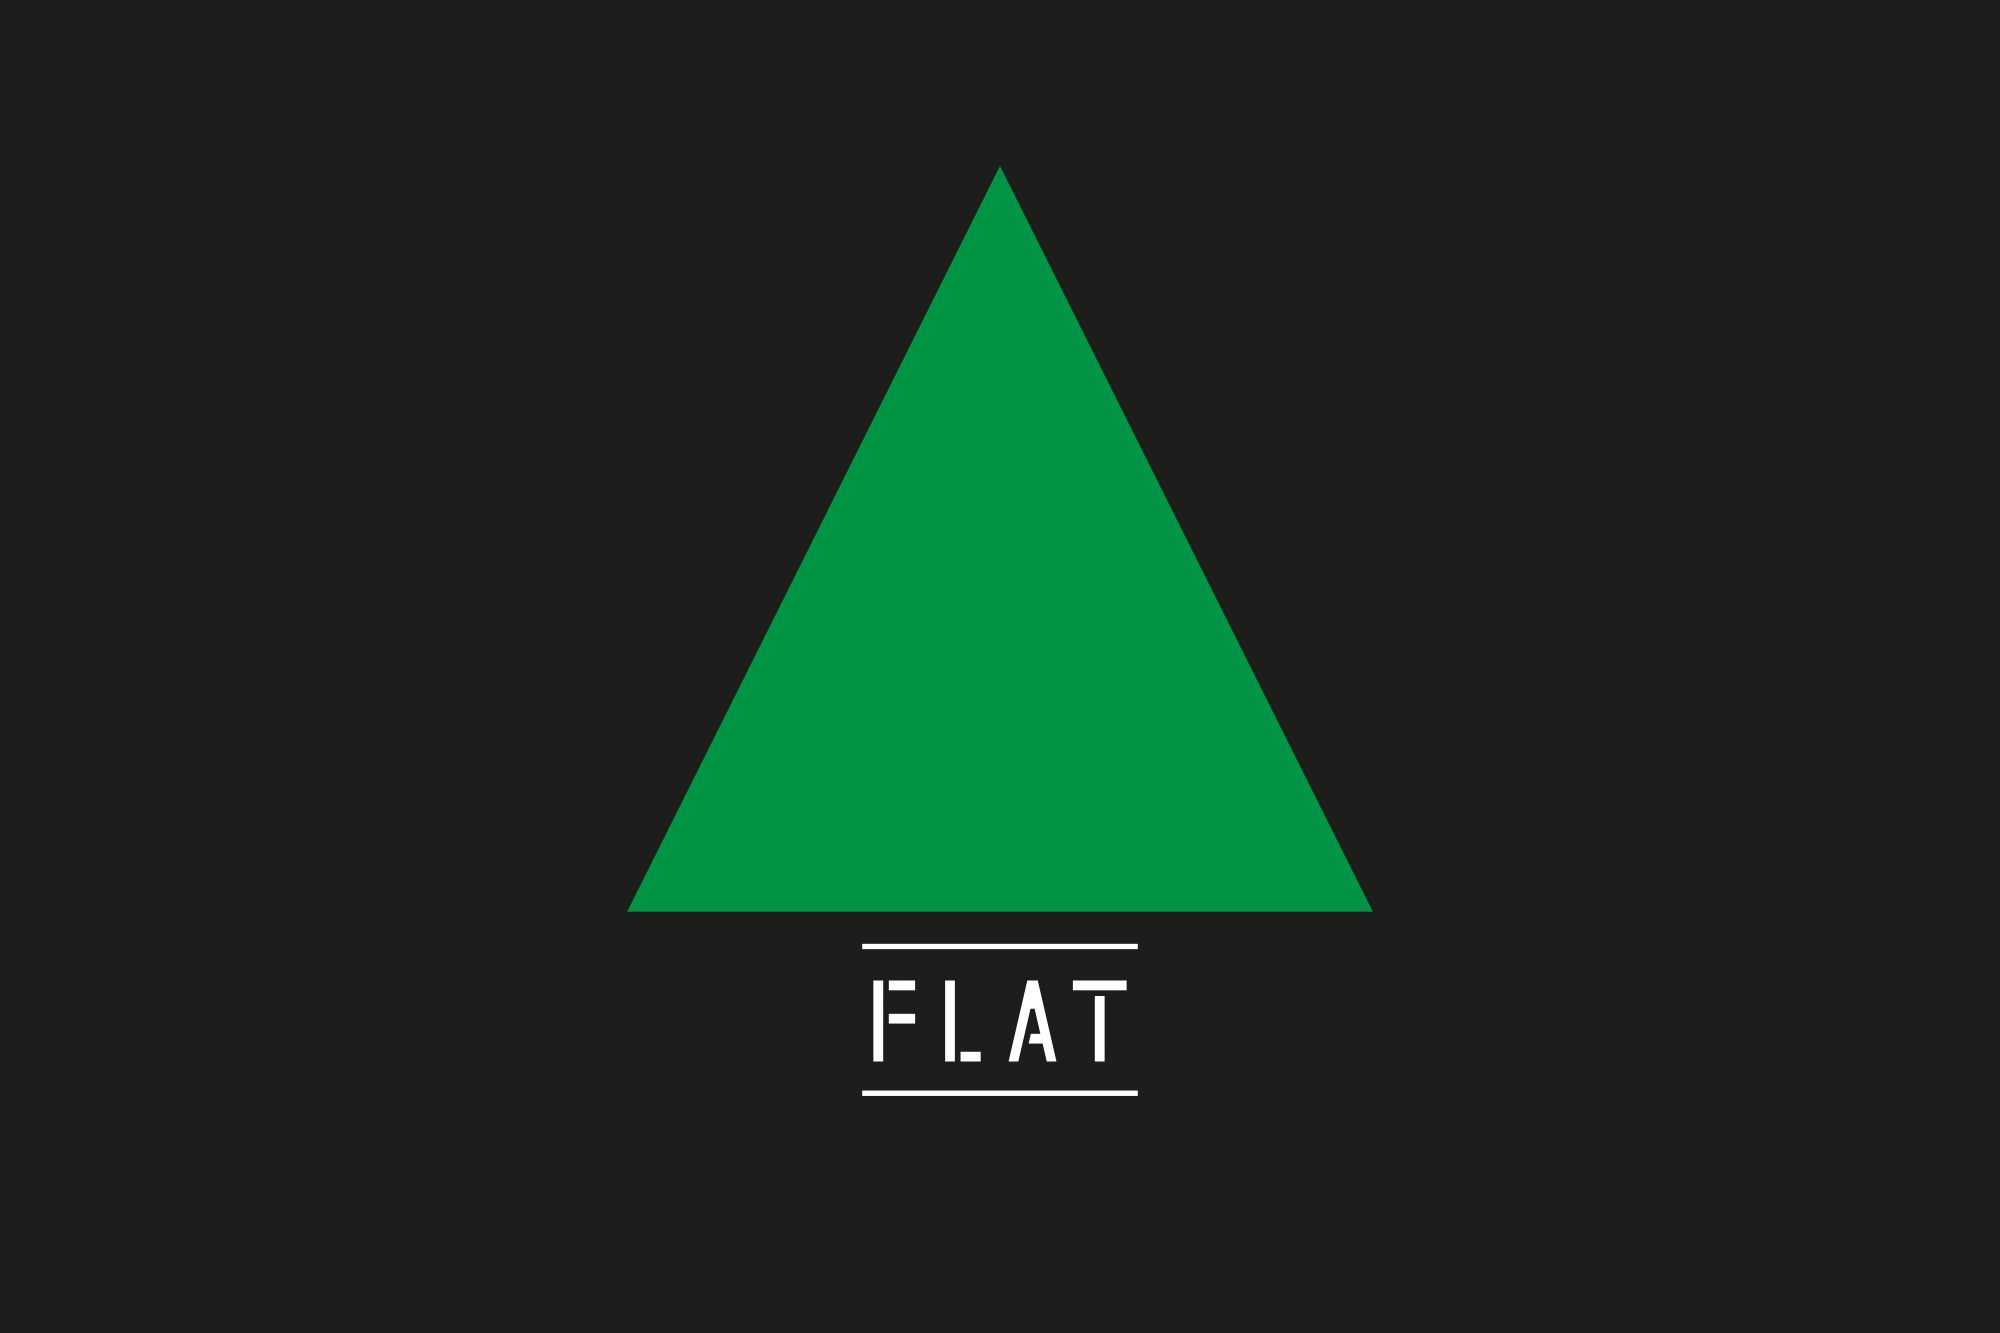 FLAT XMAS ALTERNATIVE PLAYLIST A playlist compiled by our staff, collaborators, friends & family